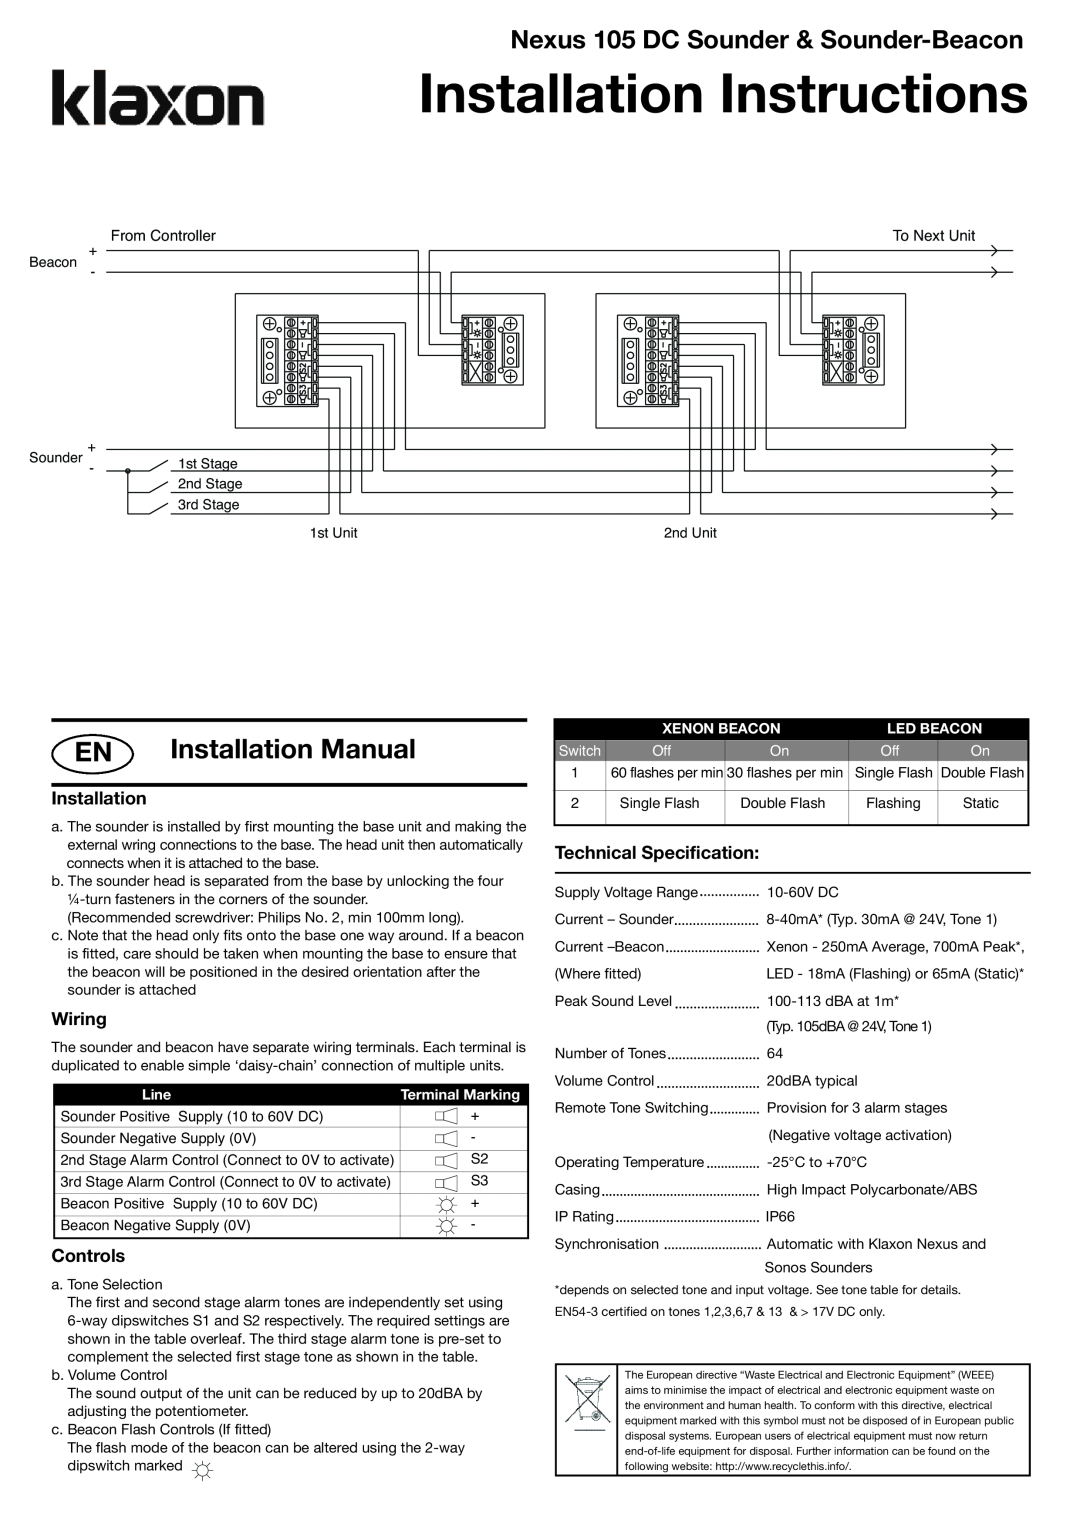 Klaxon 105 DC Installation Manual, Wiring, Controls, Technical Specification, Line, Xenon Beacon, Led Beacon, Switch 